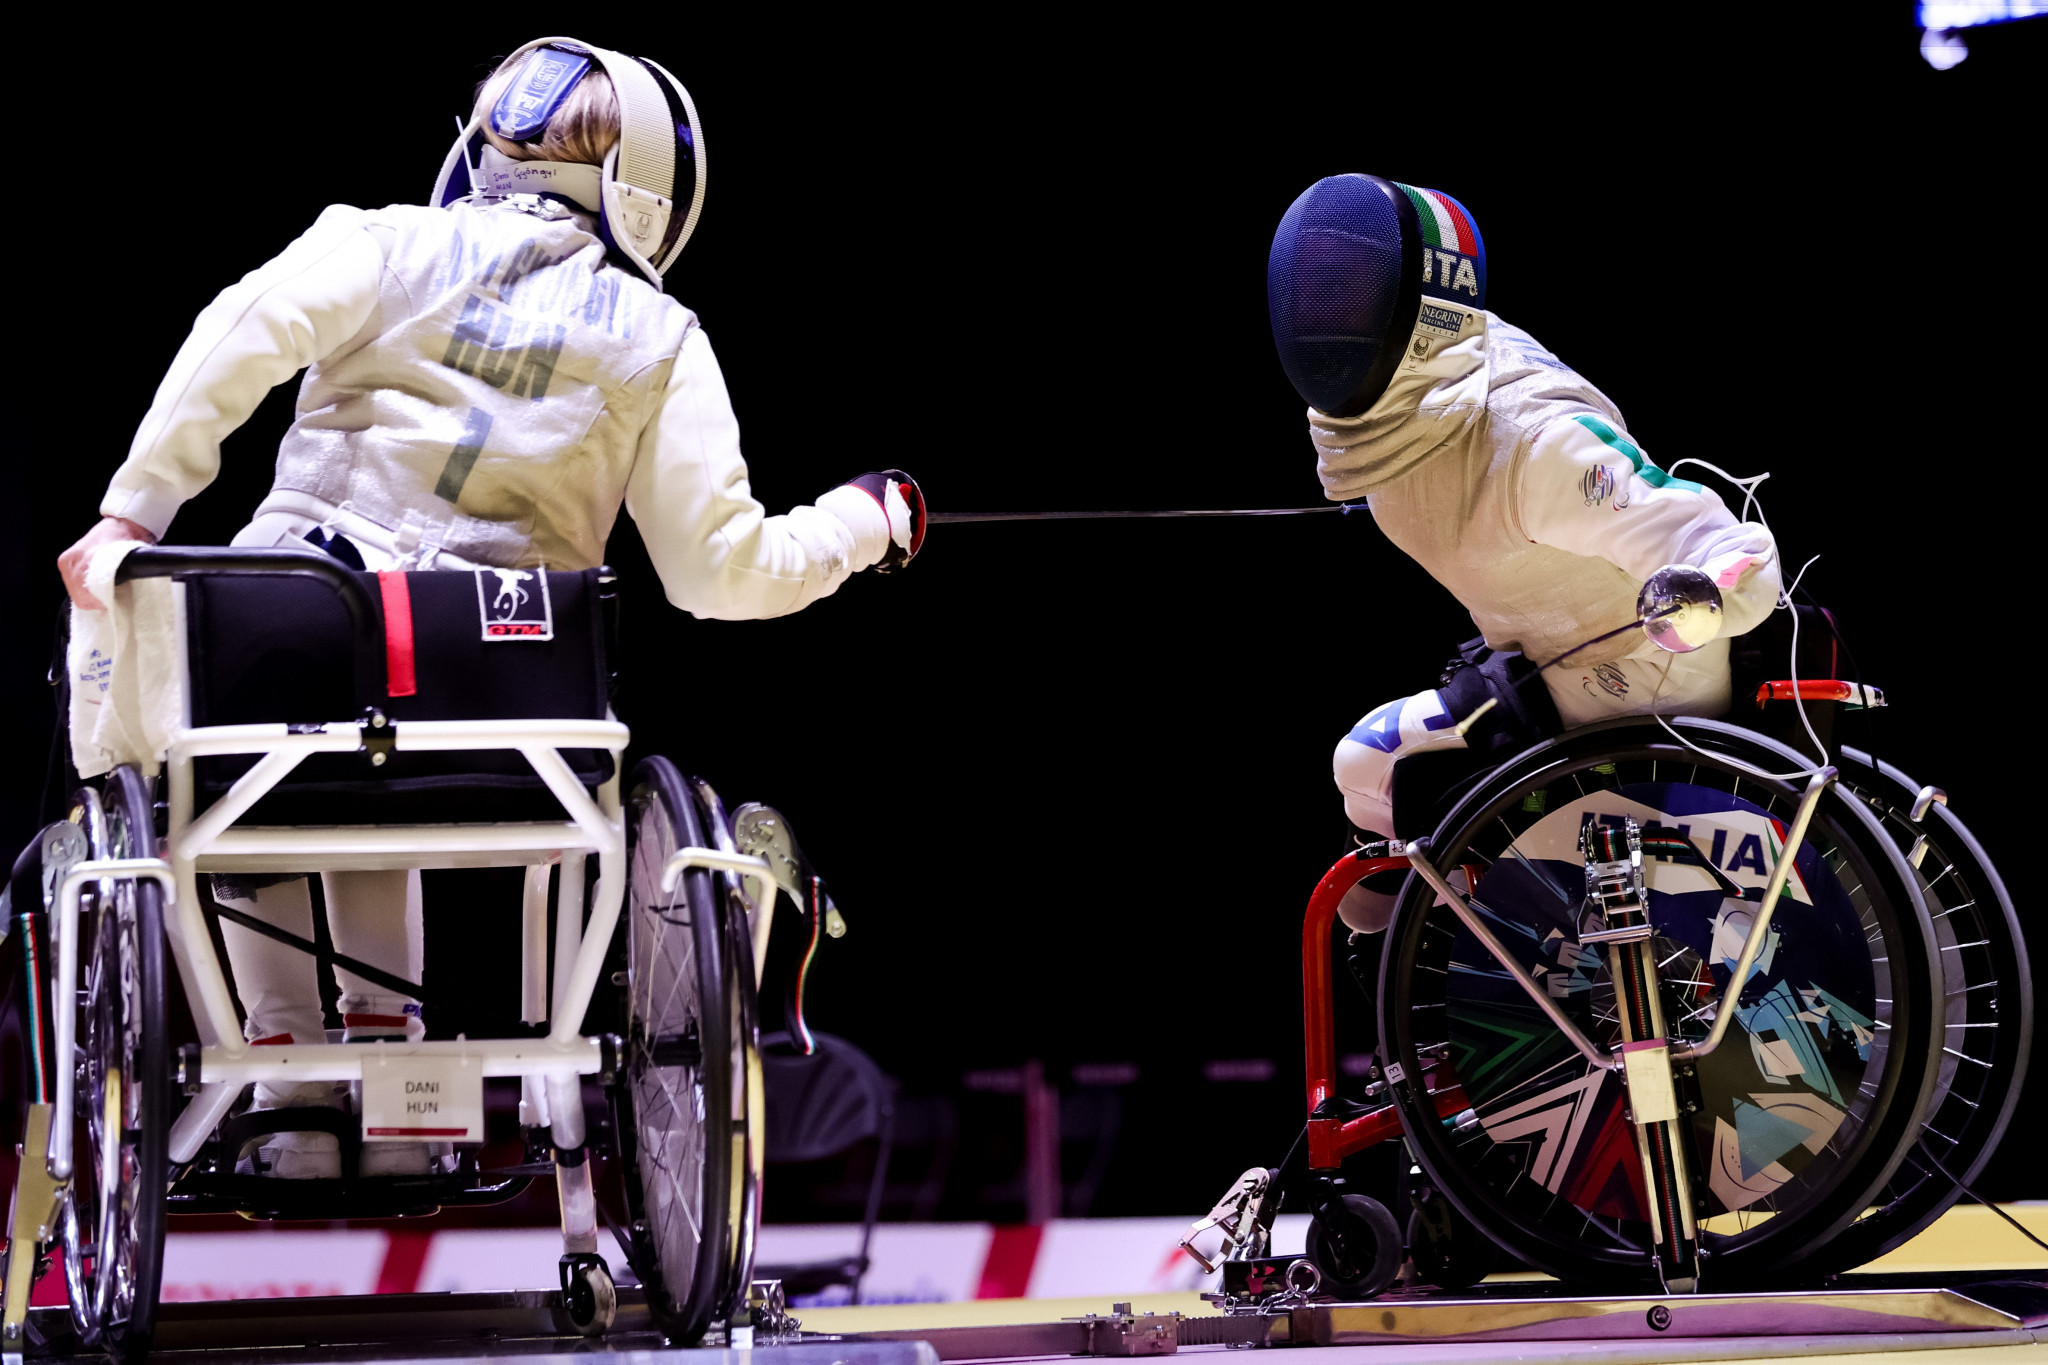 Wheelchair fencing workshop set for World Conference on Women and Sport